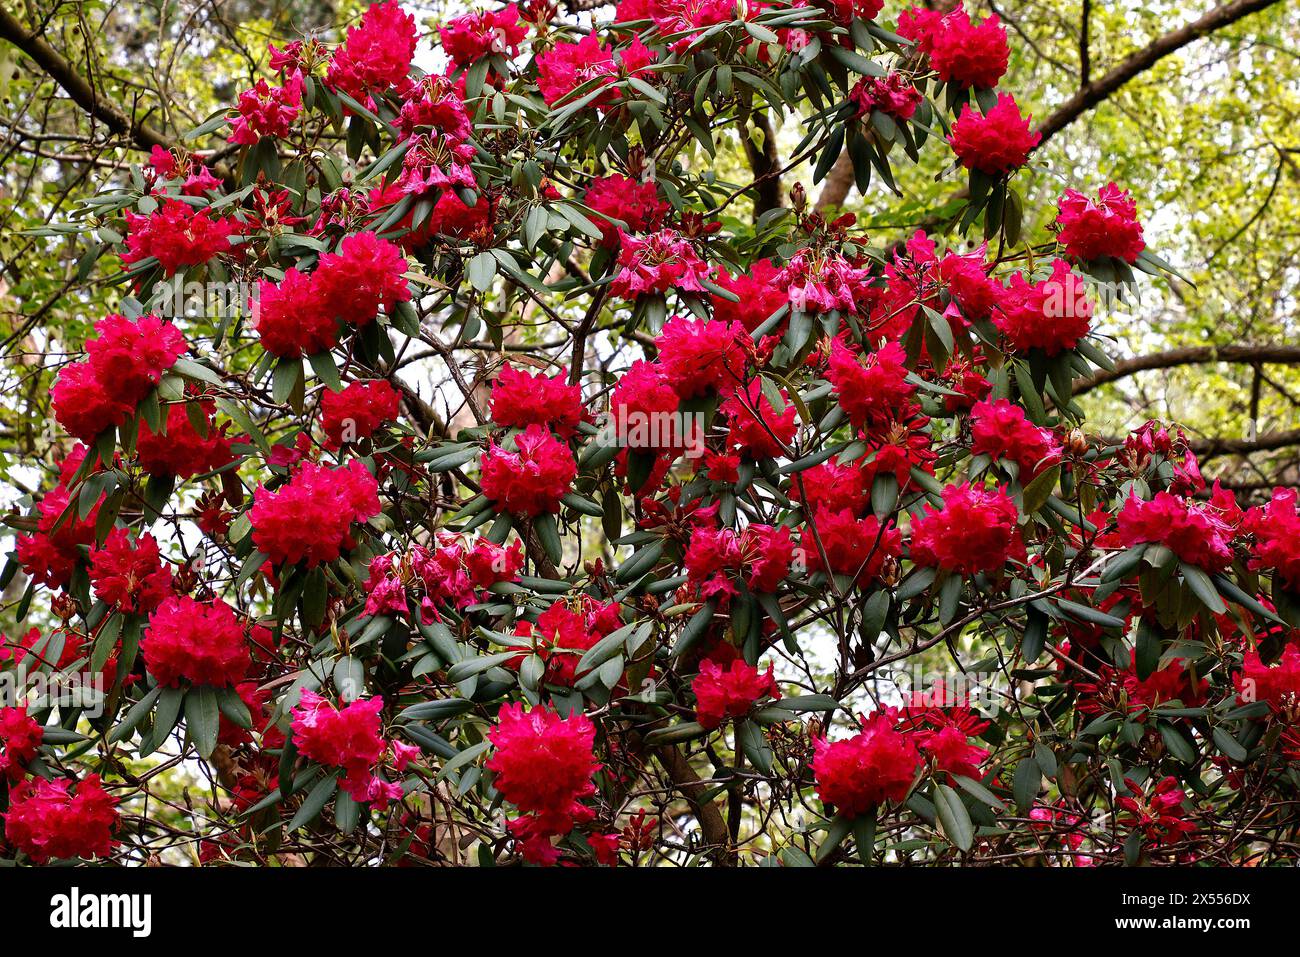 Closeup of the red flowers and green leaves of the perennial garden shrub Rhododendron Karkov group. Stock Photo